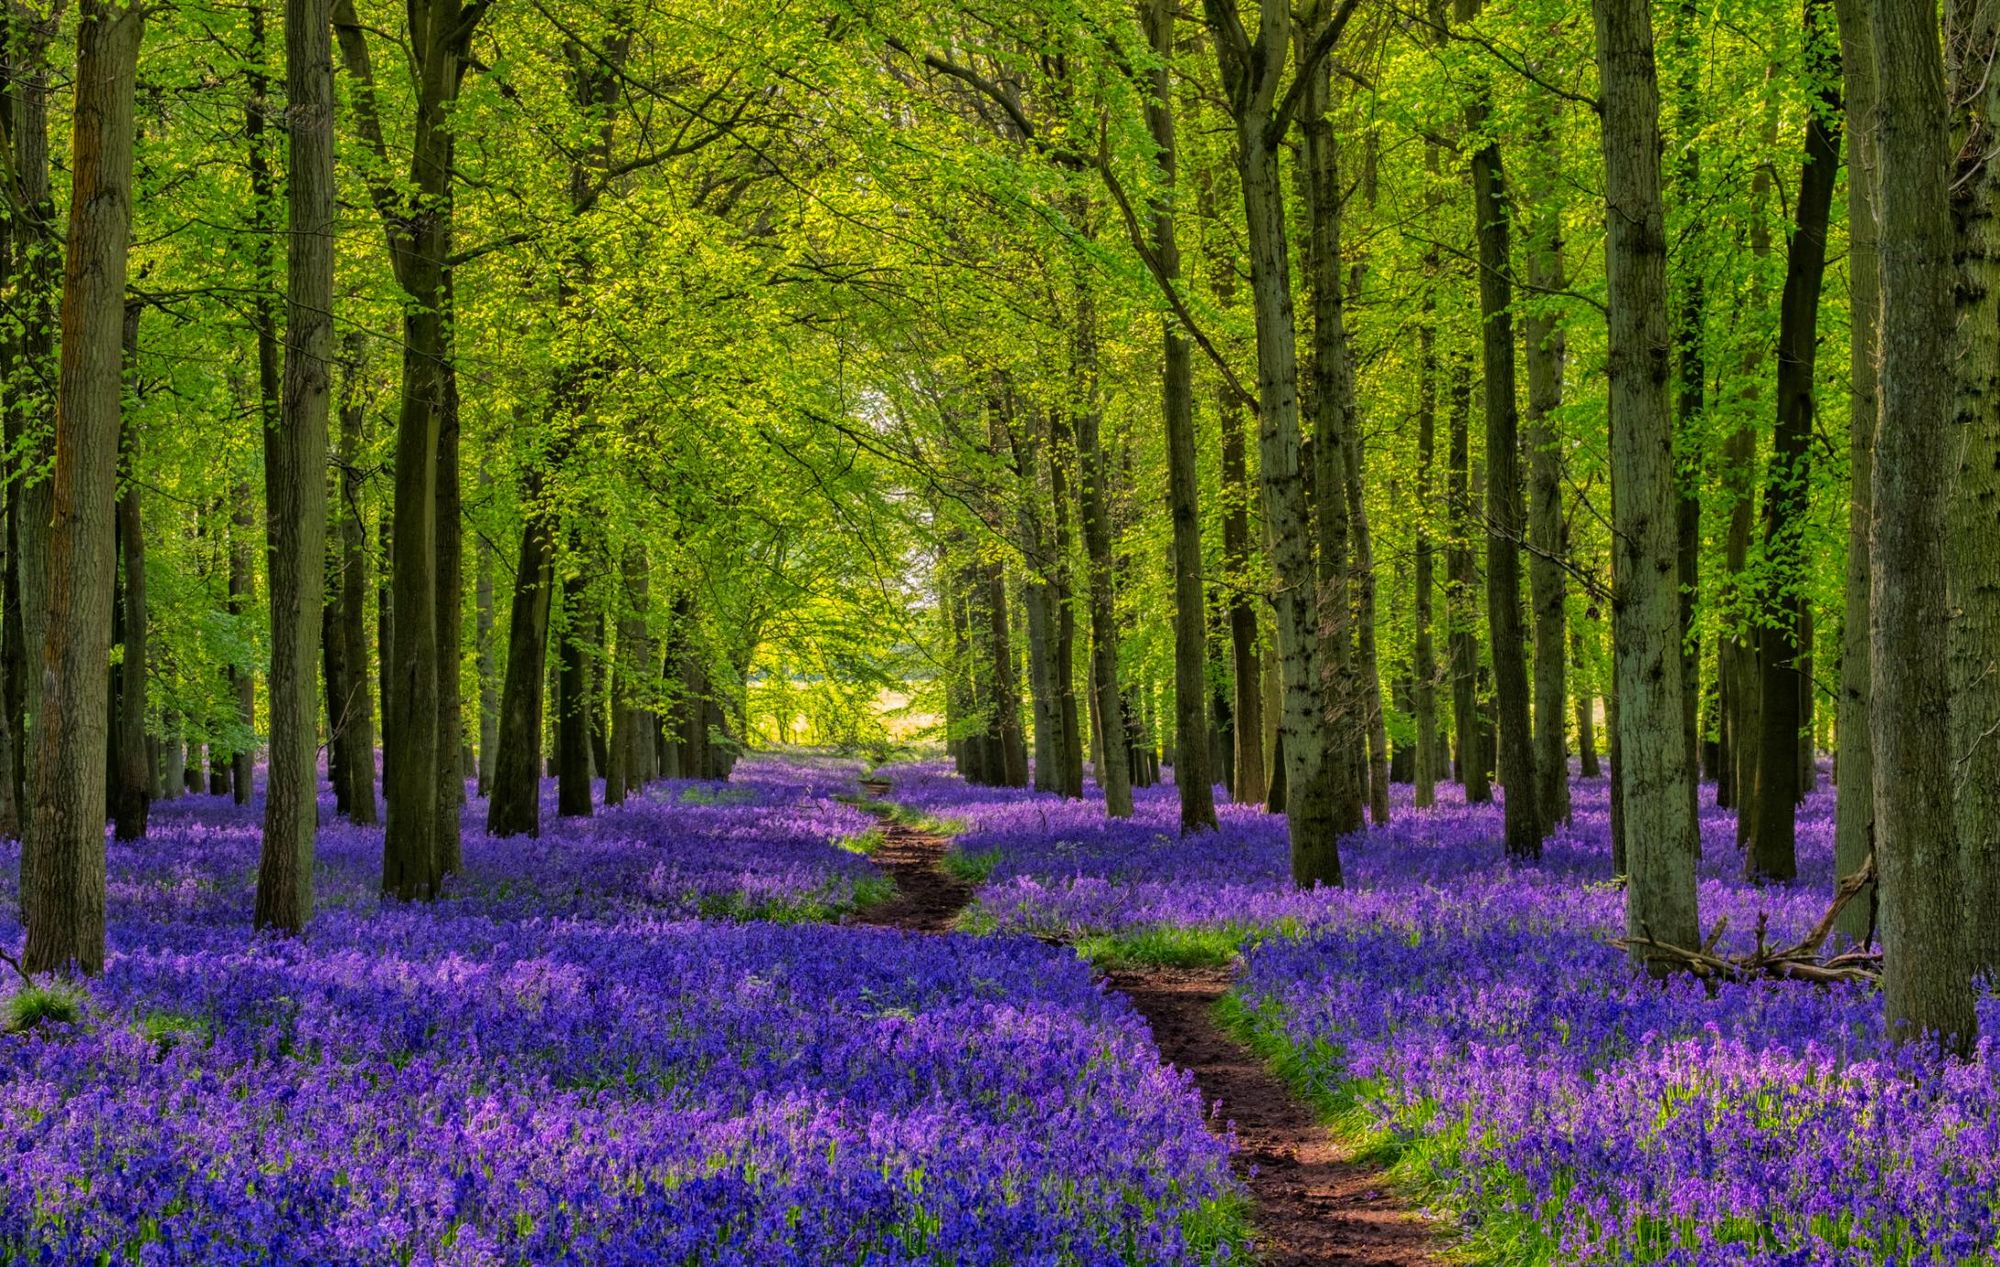 A path through the Bluebells in the Chilterns near London. Photo: Getty